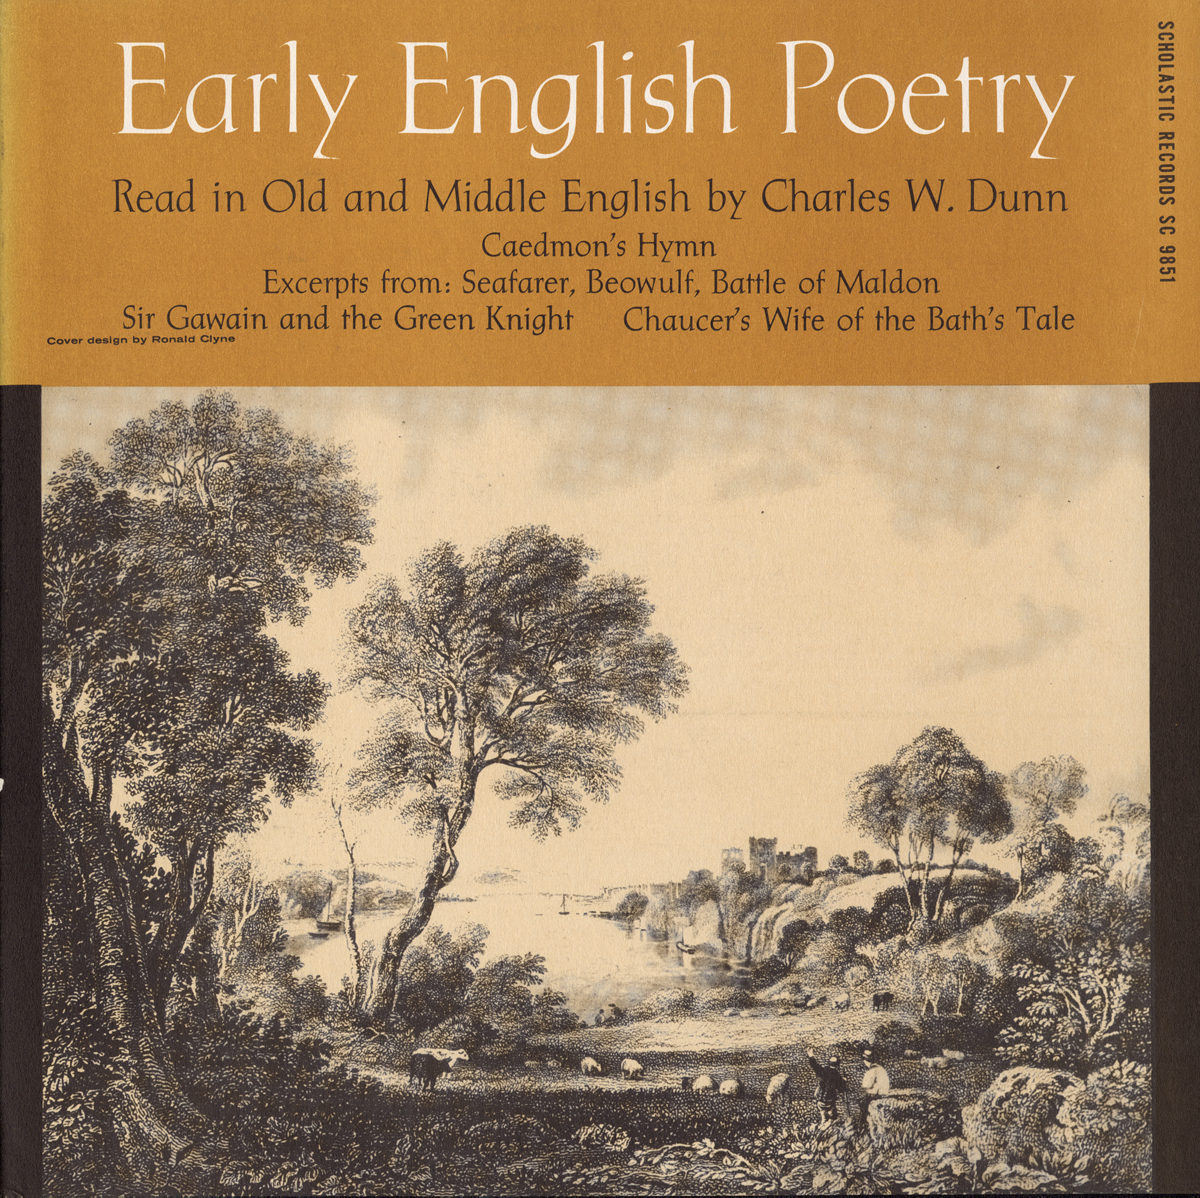 EARLY ENGLISH POETRY